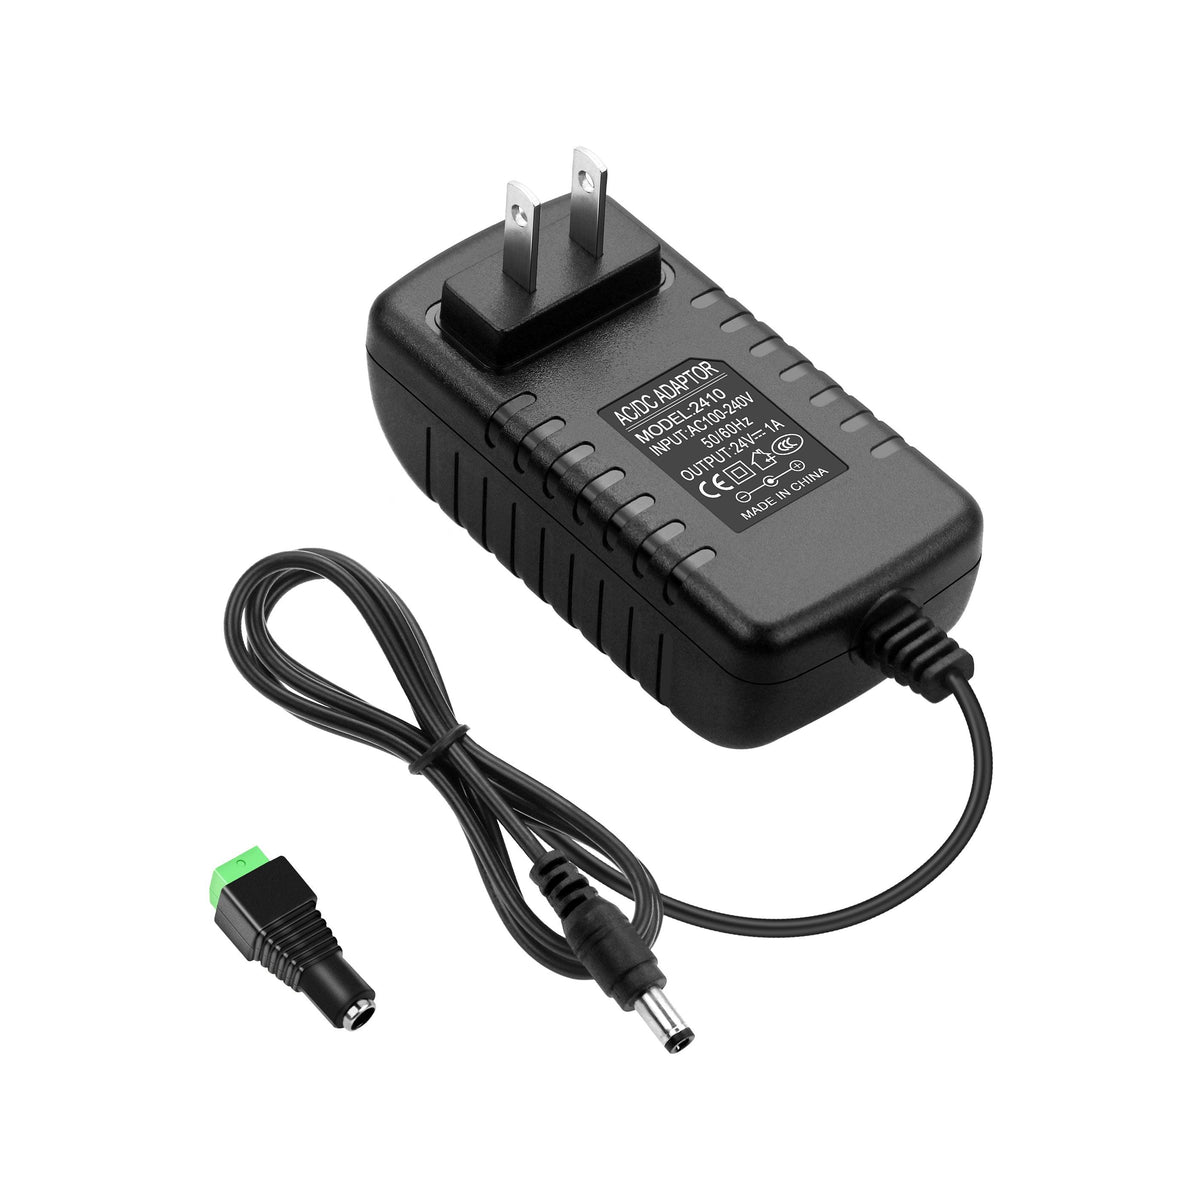 ALITOVE 24V 1A Power Adapter - Ideal for LED Strip Lights and Small Devices - ALITOVE-Add Vivid Color to Life